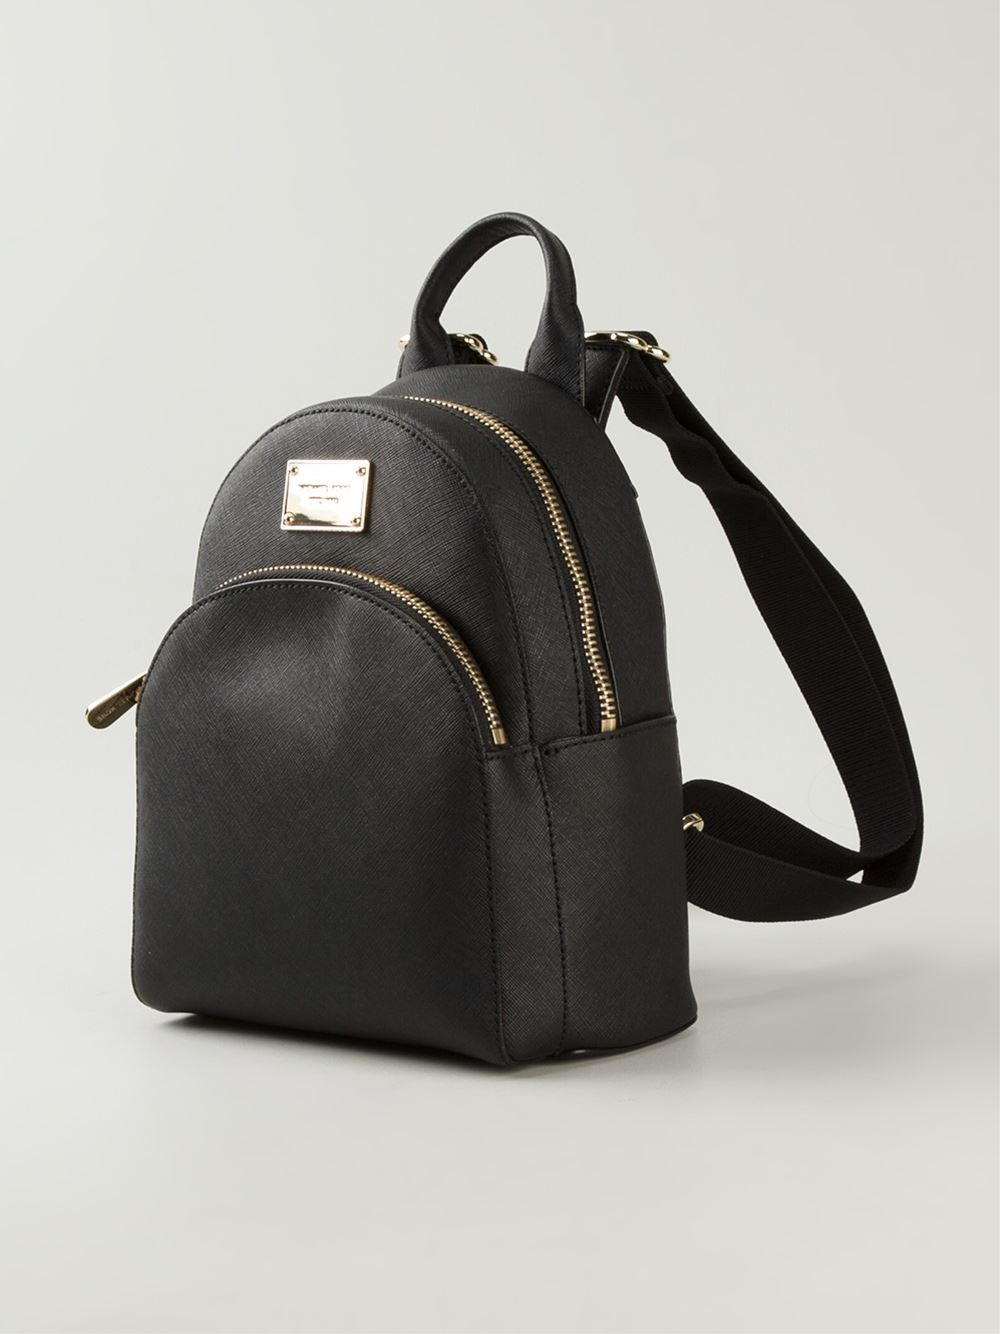 Lyst - Michael Kors Small Backpack in Black